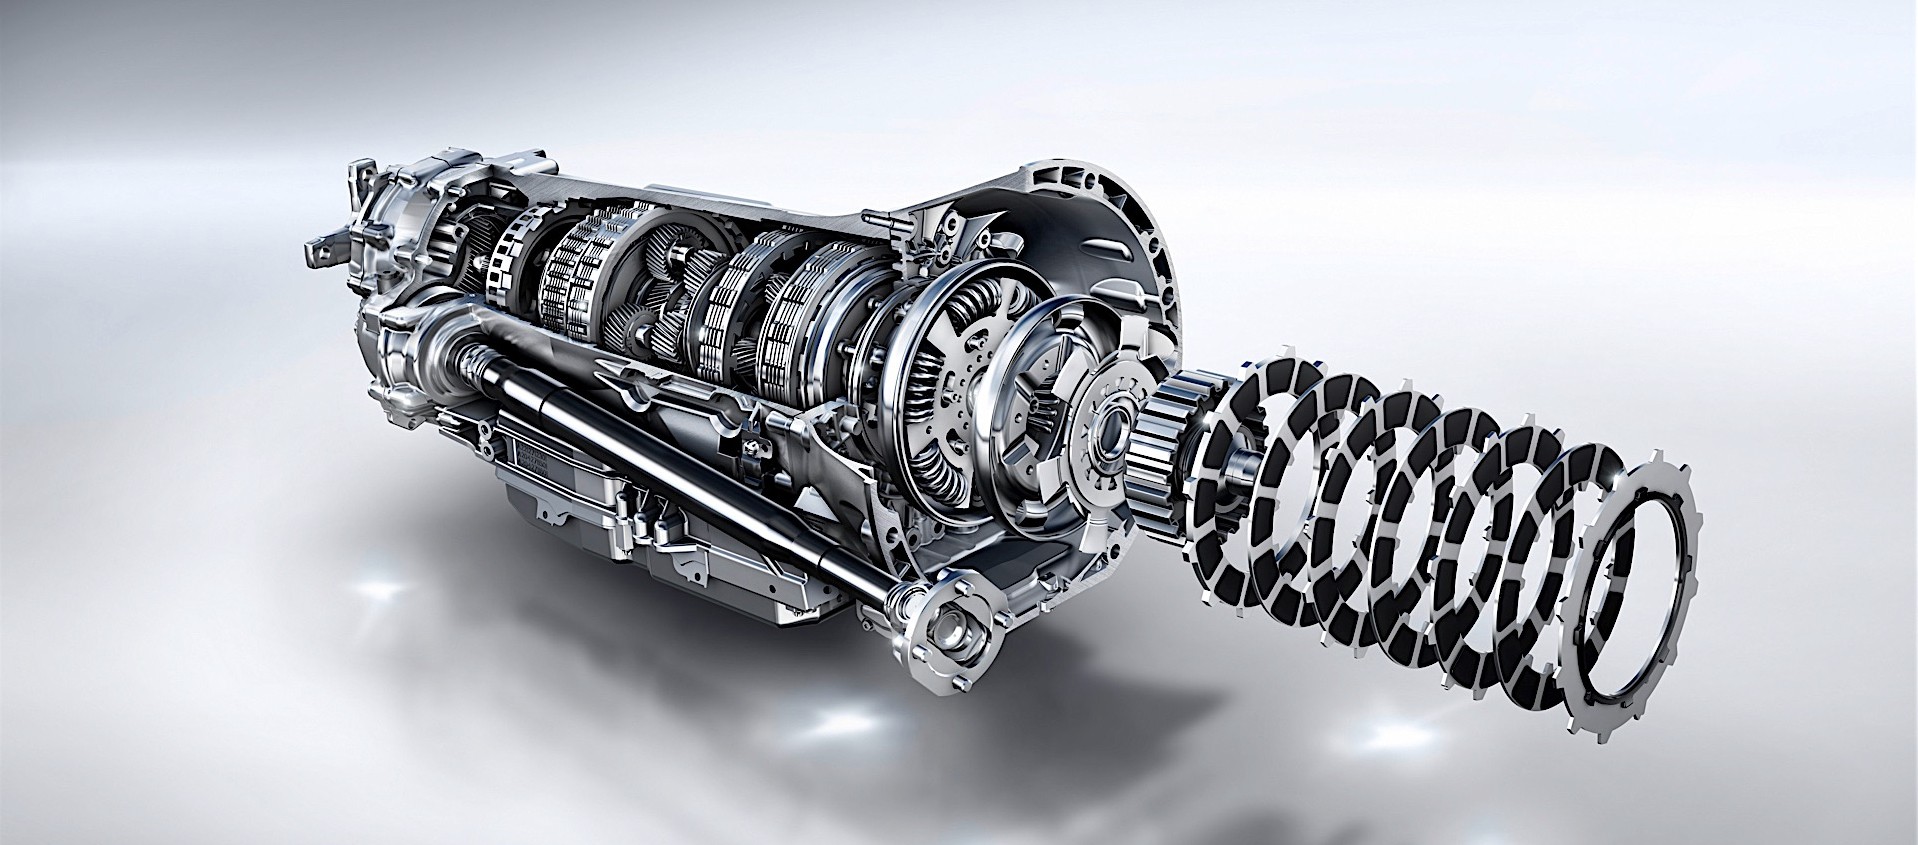 mercedes-amg-mct-transmission-explained-in-layman-s-terms_8.jpg